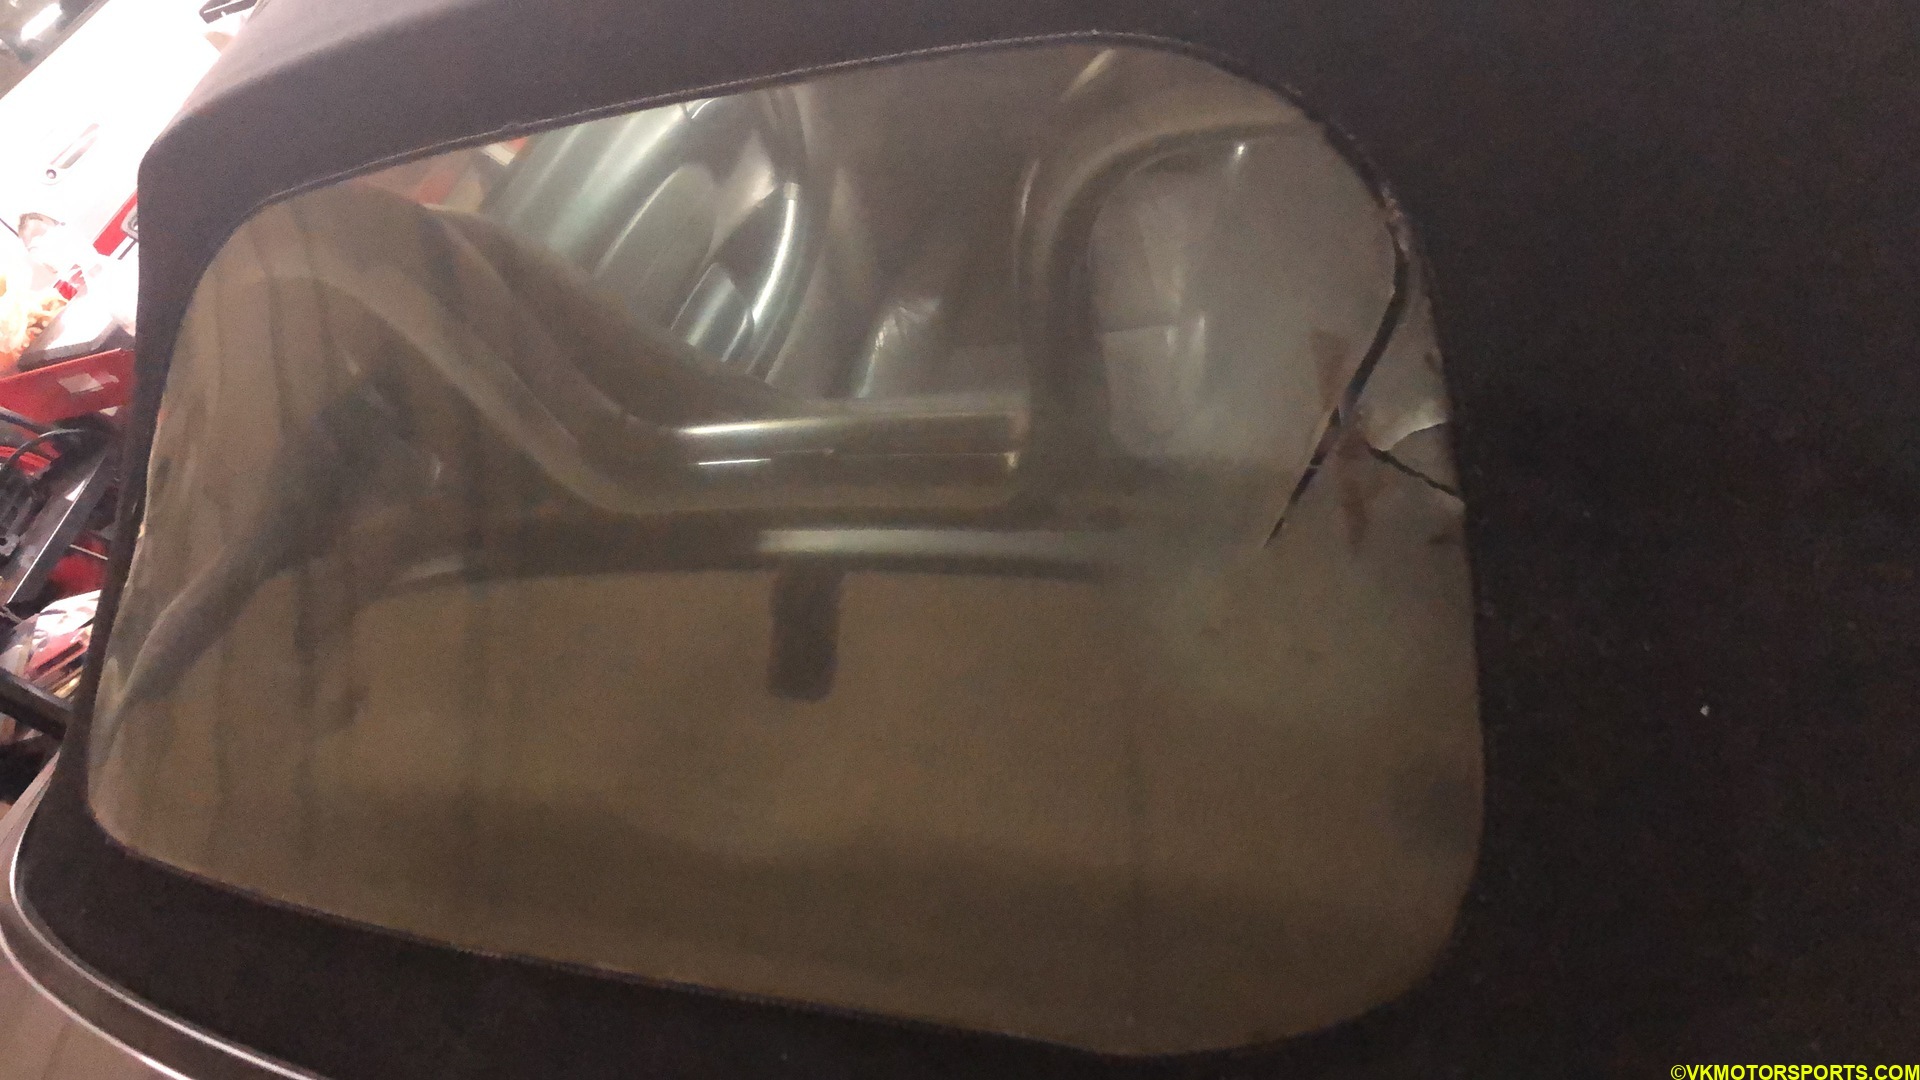 Figure 5. Cleaned soft top and vinyl window tear area